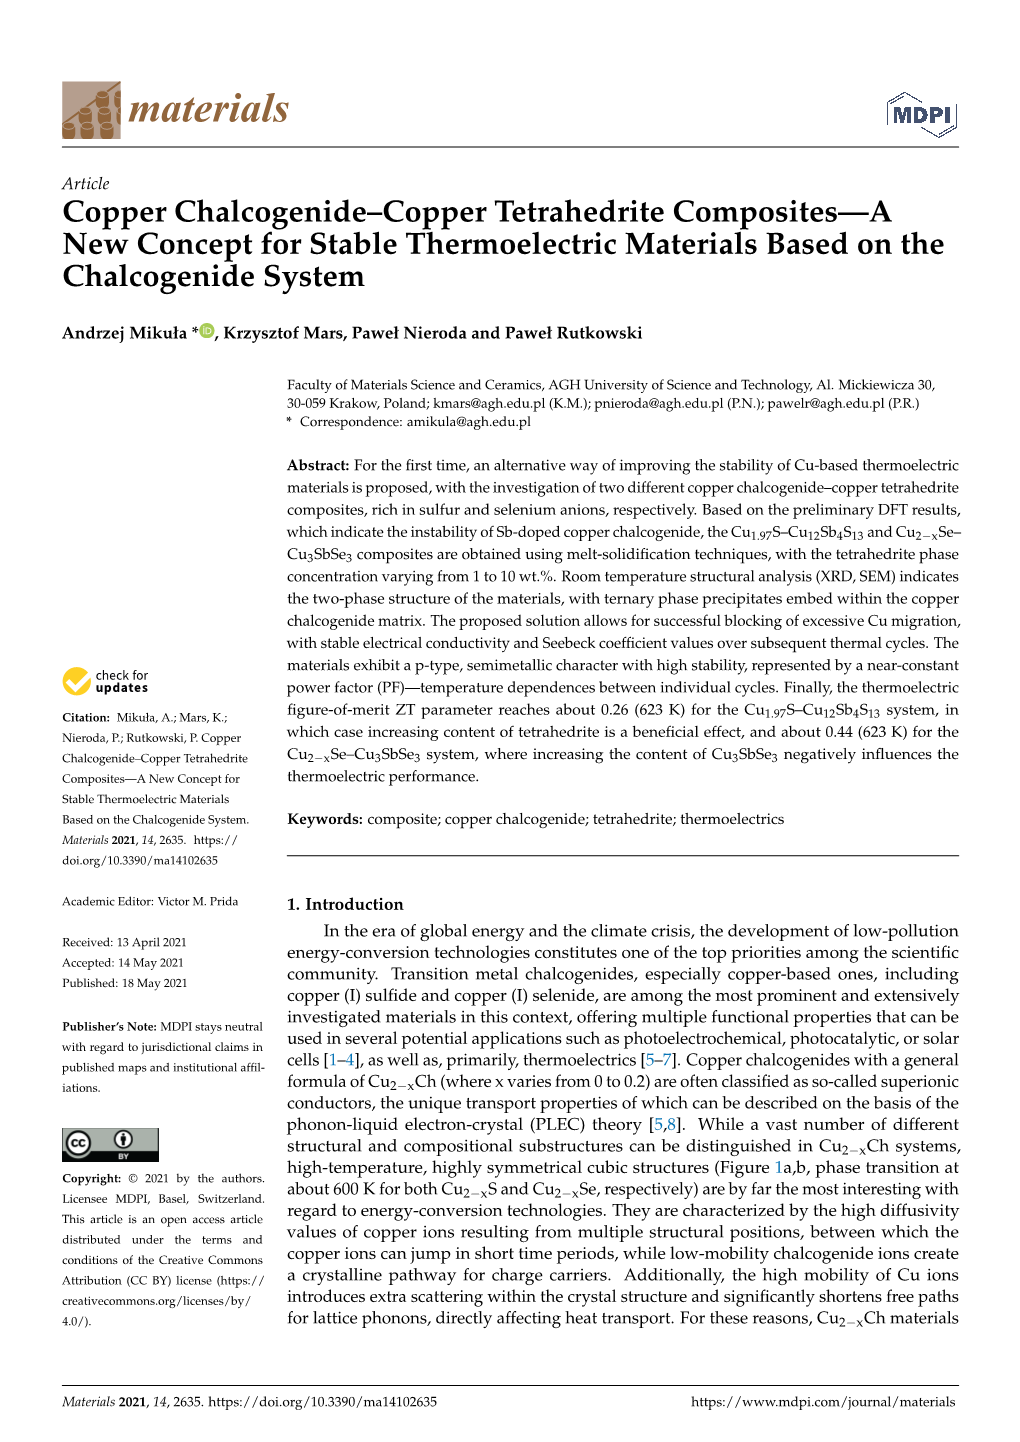 Copper Chalcogenide–Copper Tetrahedrite Composites—A New Concept for Stable Thermoelectric Materials Based on the Chalcogenide System